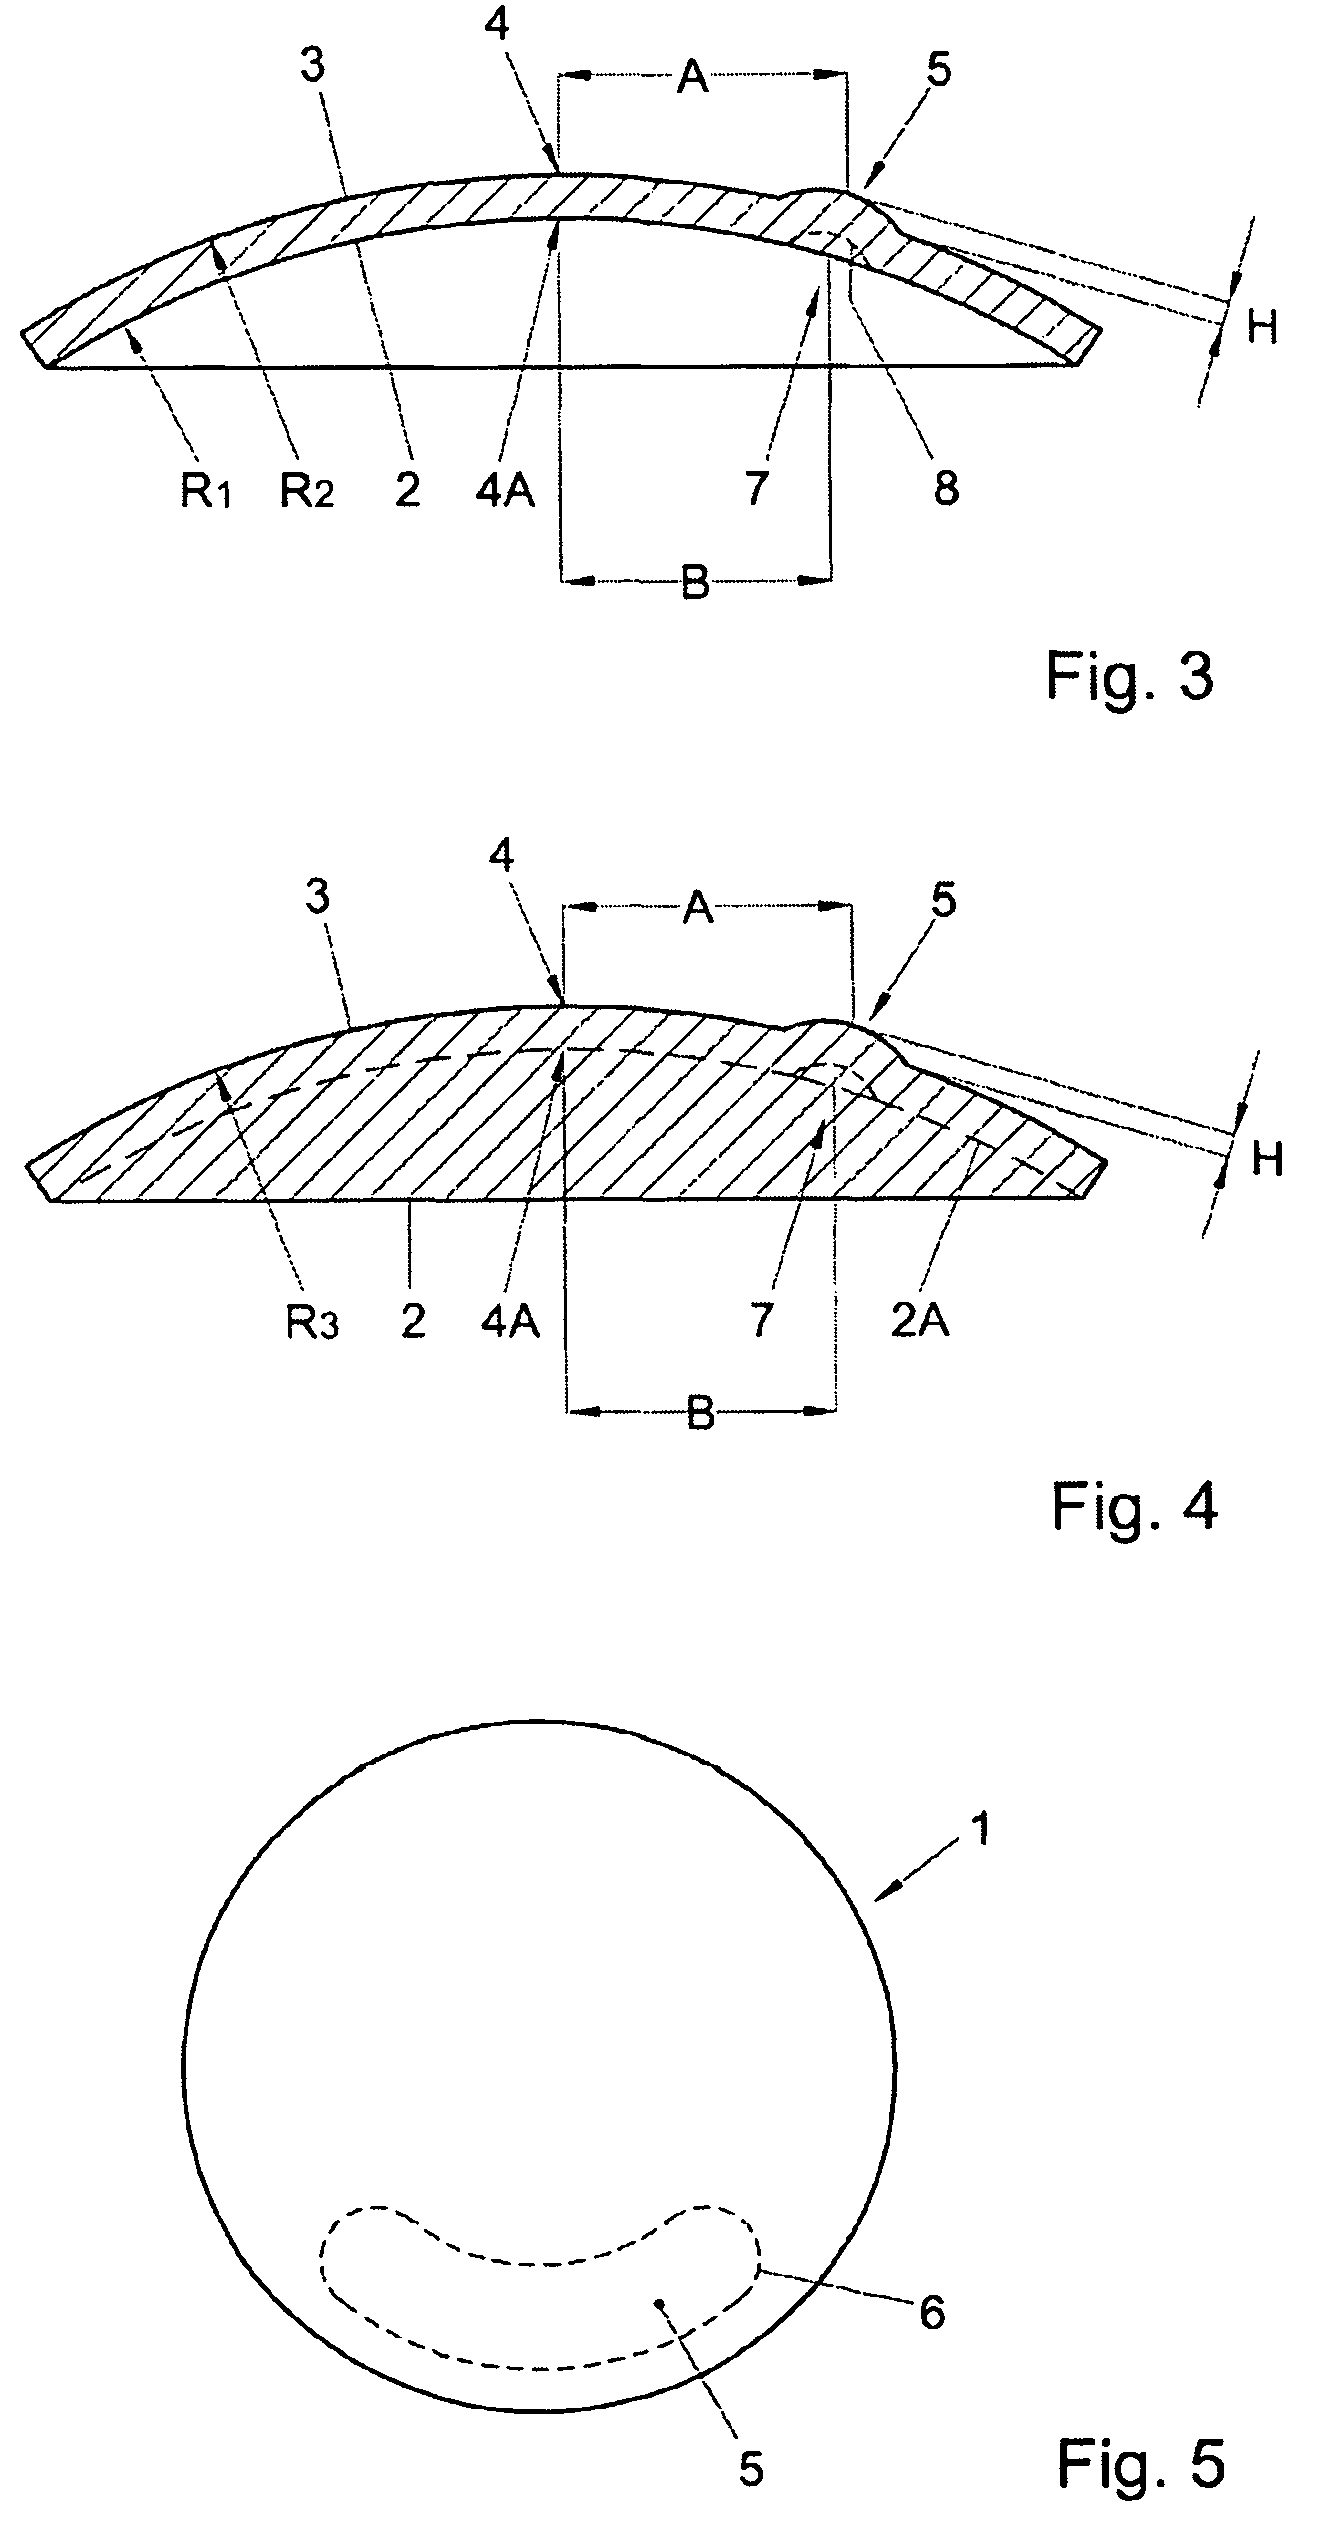 Apparatus and method for manufacturing optical objects